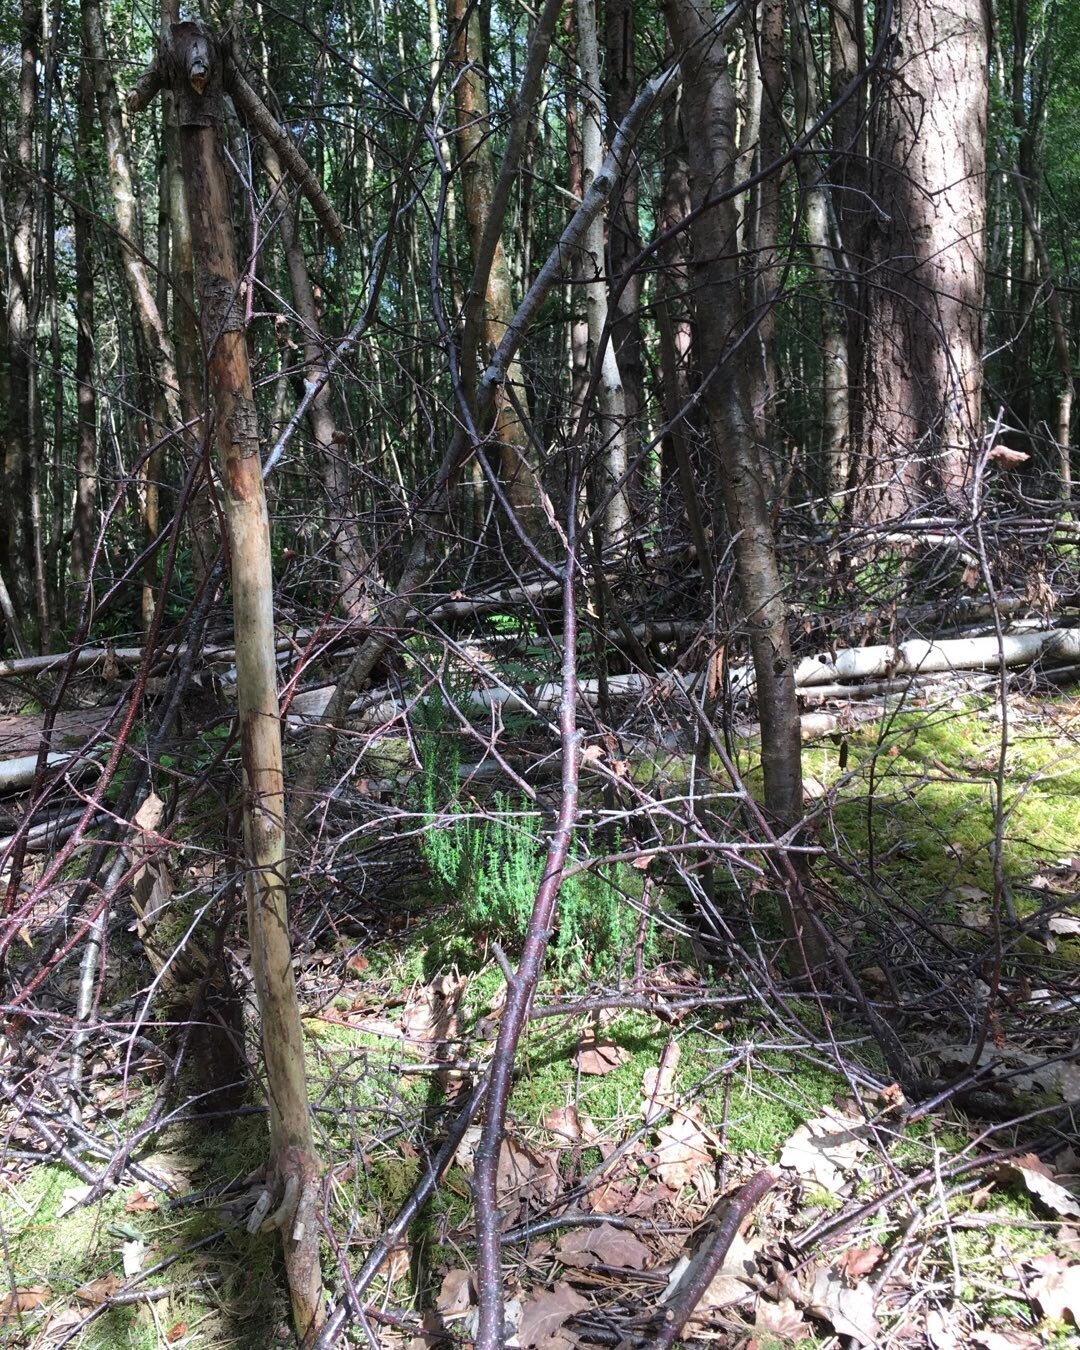 Attempts to discourage the deer in @doewood from eating the heather seem to be working. A covering of bendy birch twigs, woven together, seems to put them off. The heather indicates that the site was once heathland as well as ancient woodland, before